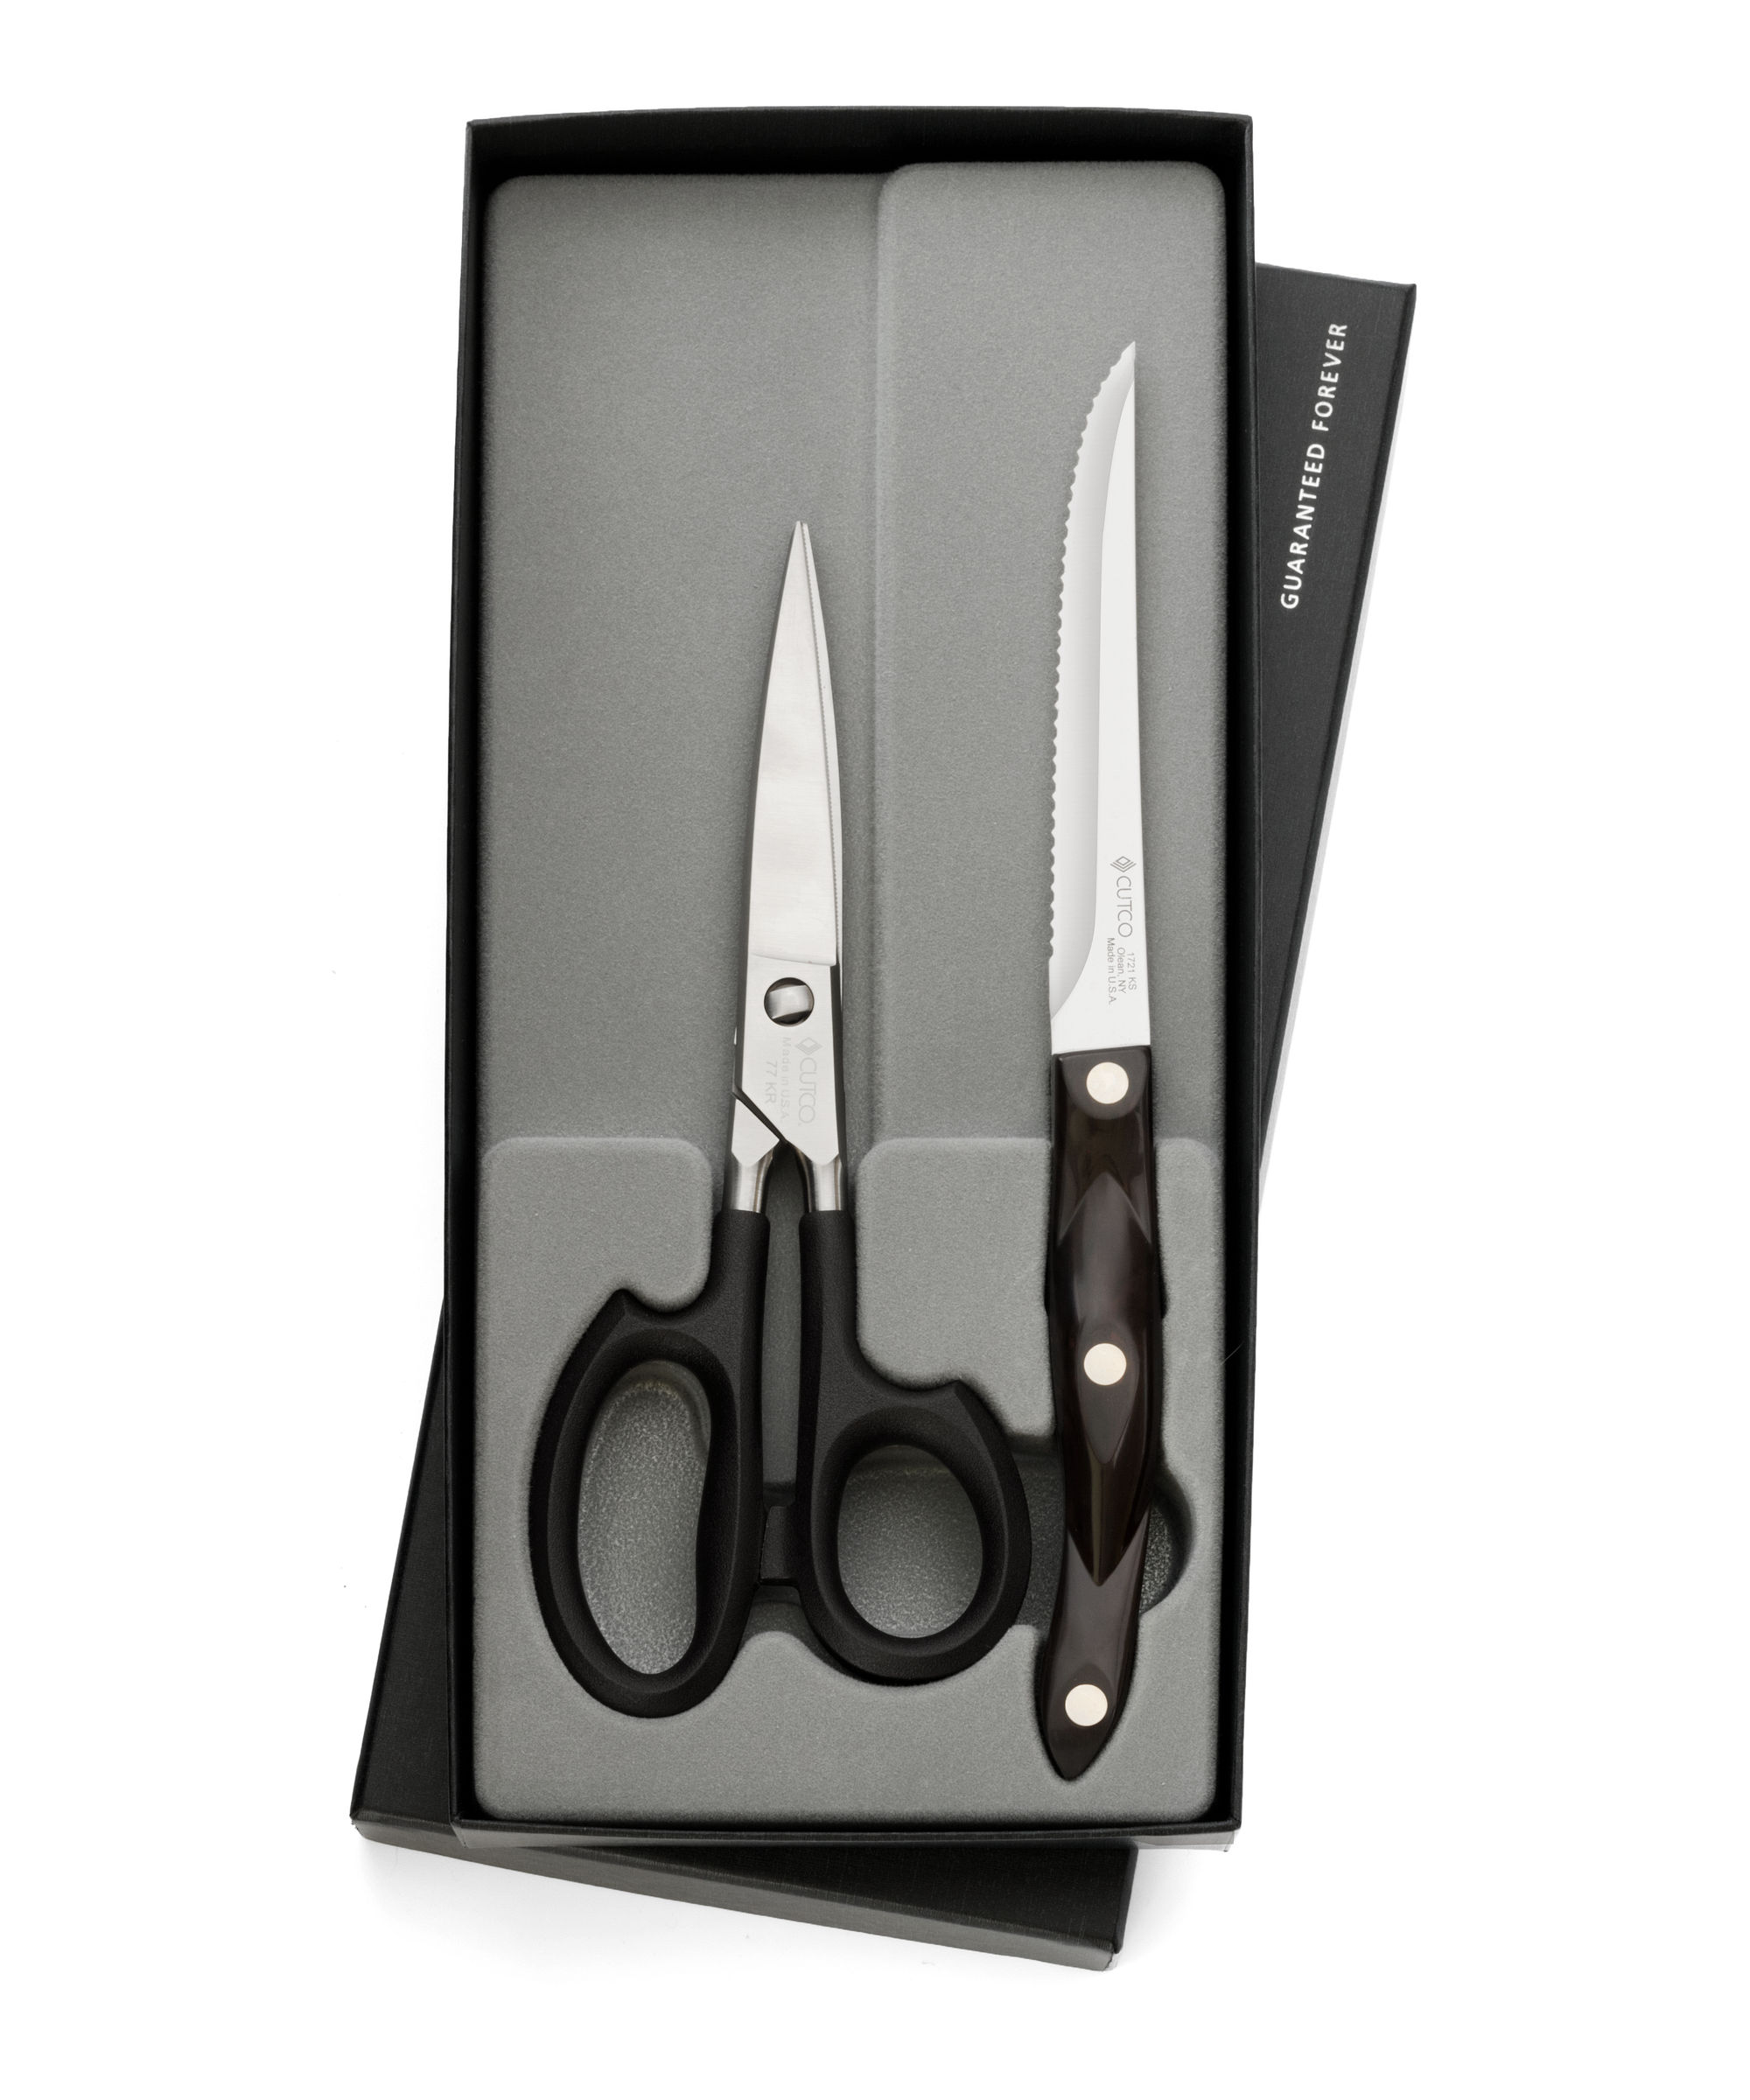 WÜSTHOF Gourmet 2-Piece Paring Knife and Shears Utility Set